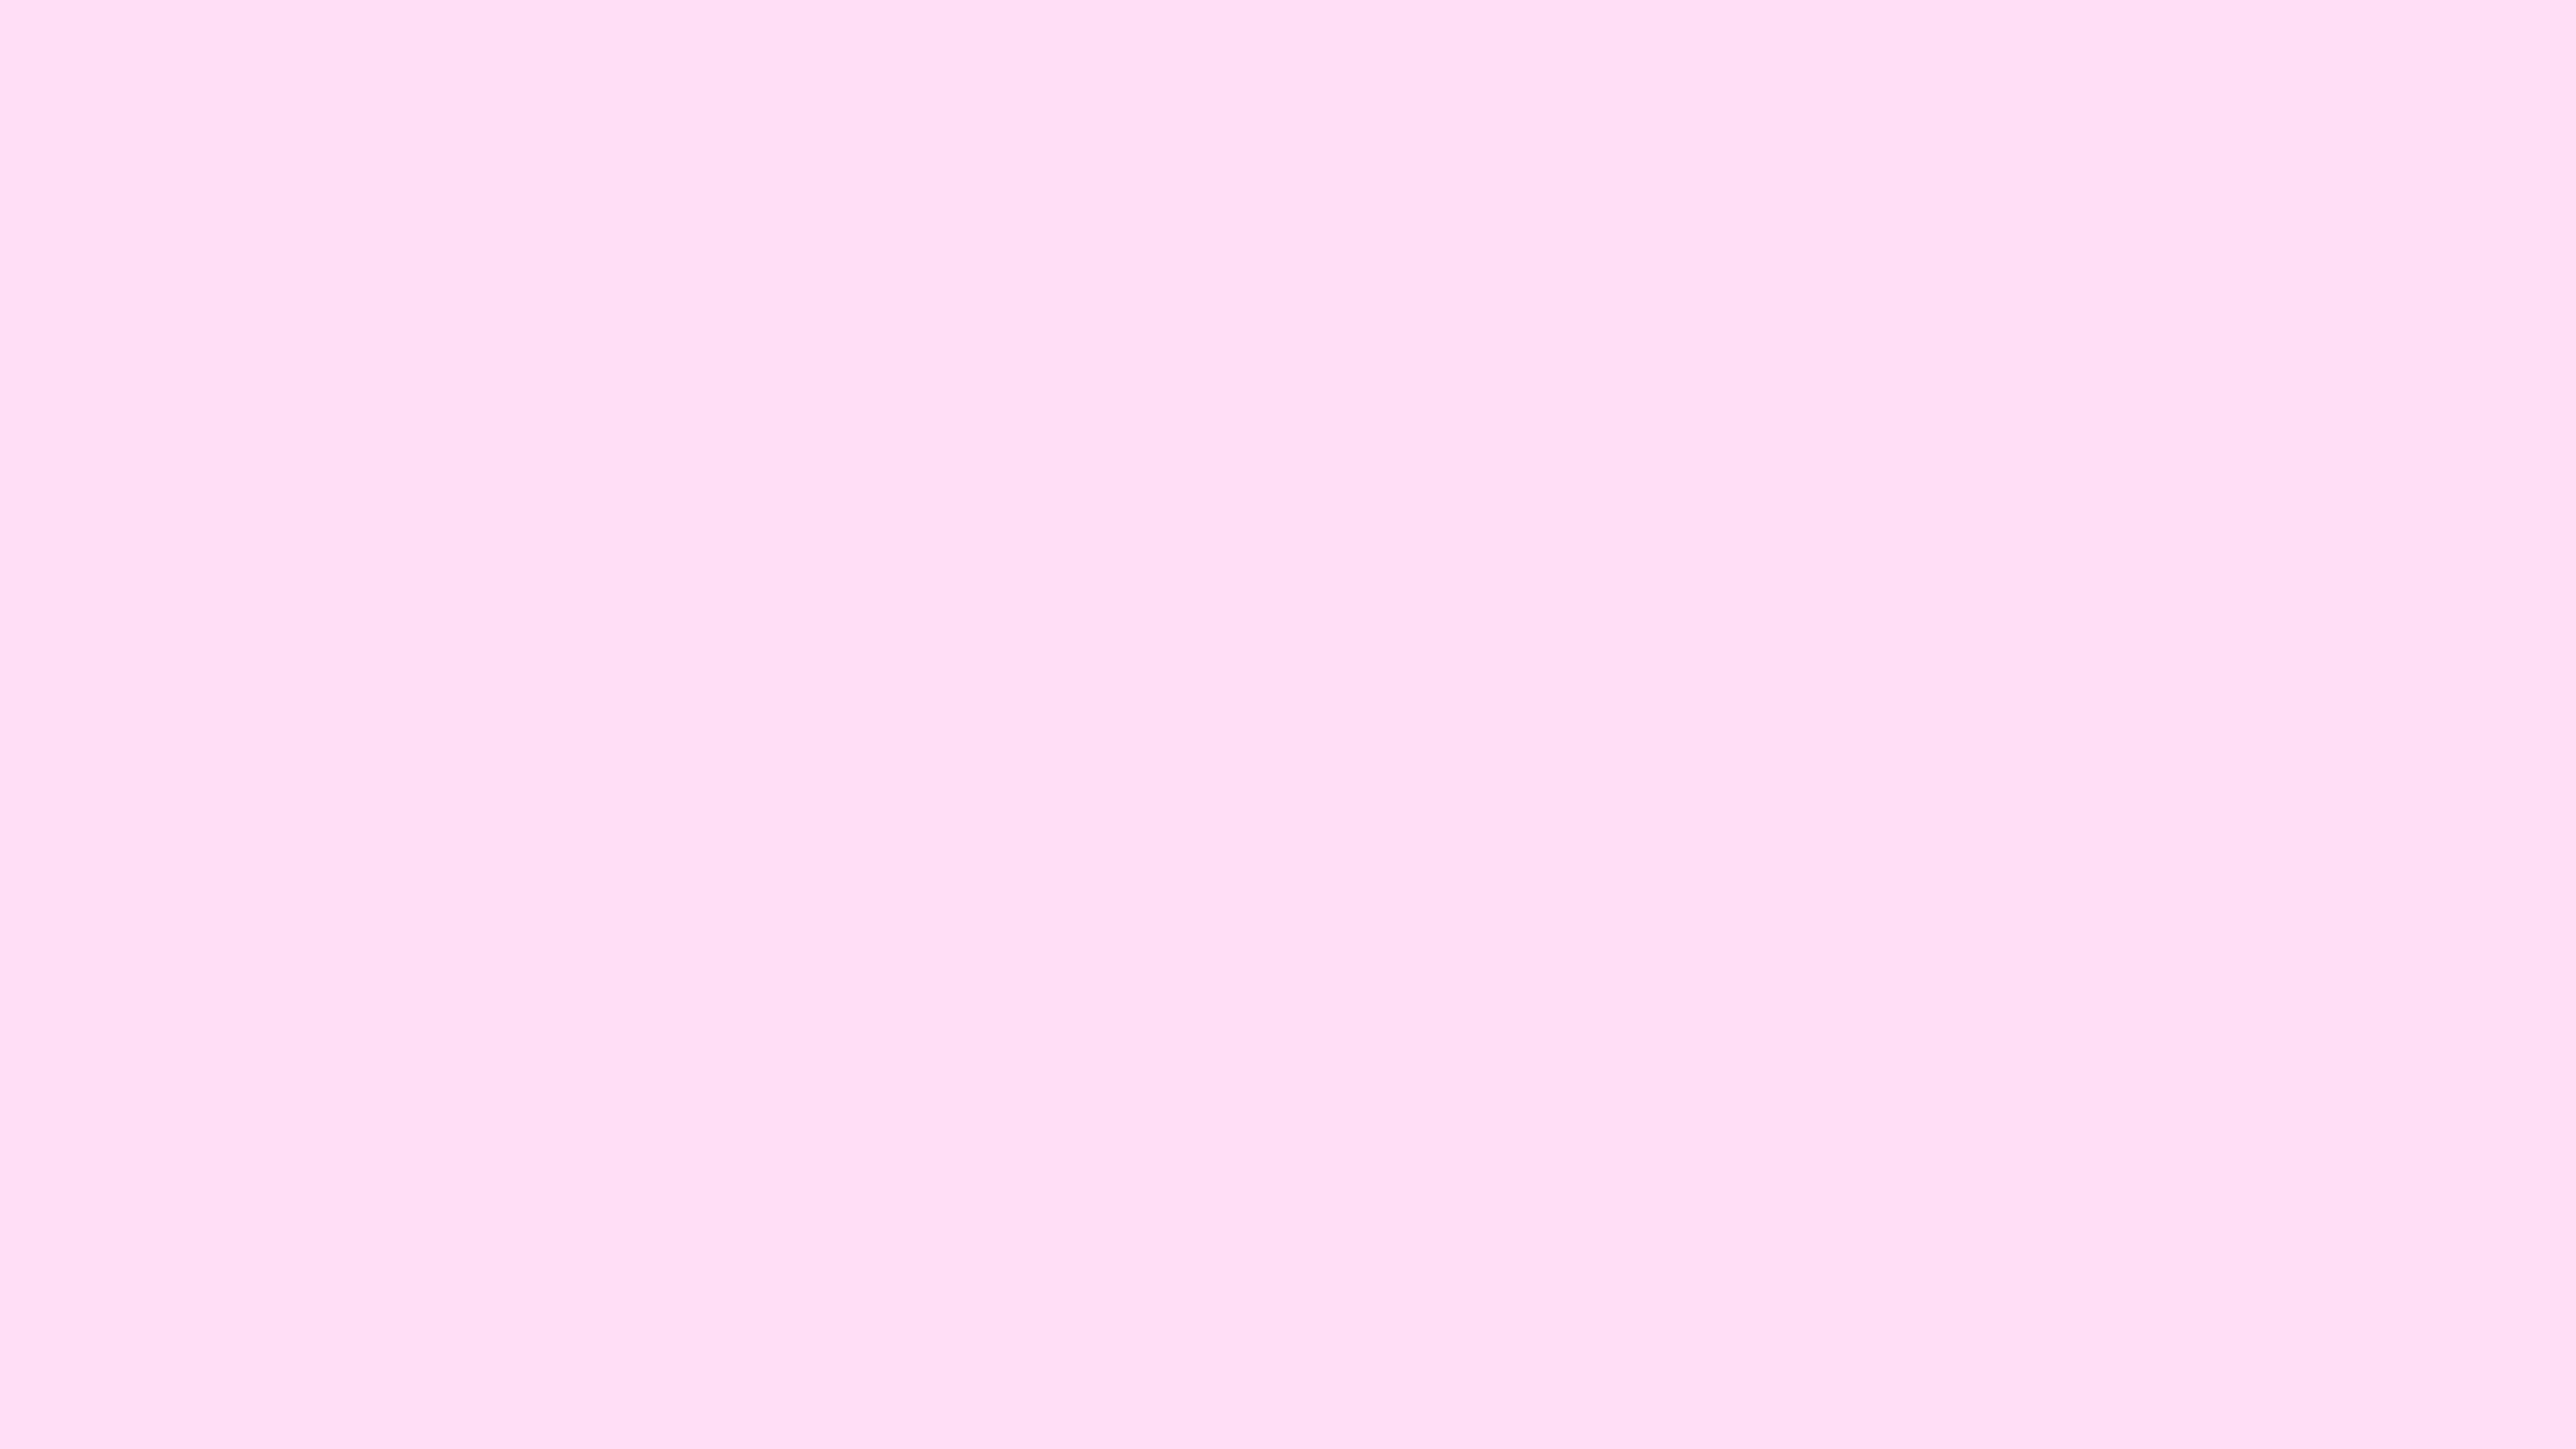 4096x2304 Pink Lace Solid Color Background